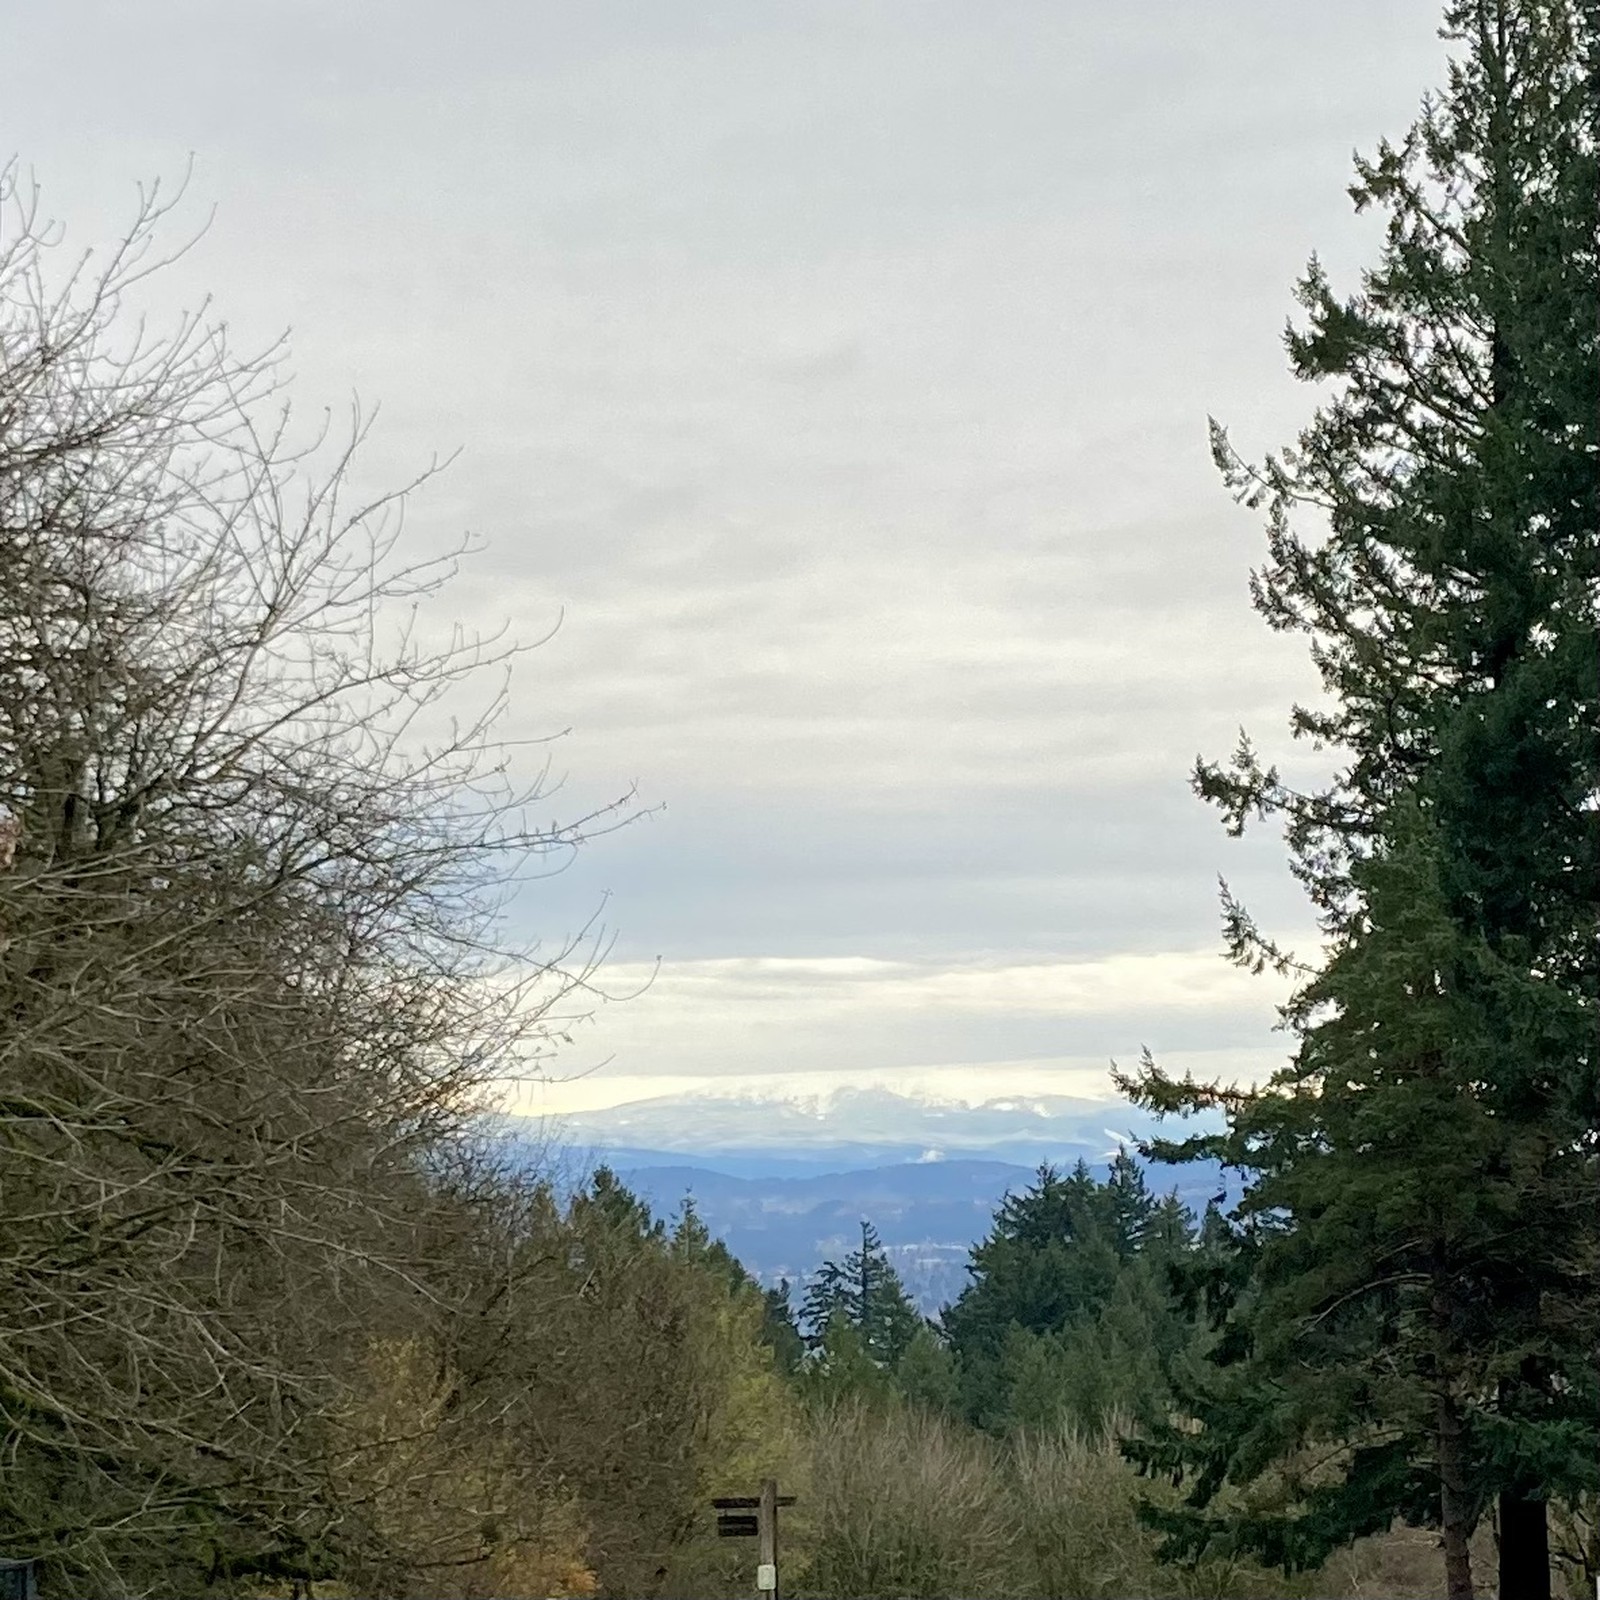 View from Council Crest Park toward Mt. Hood, the snowy base and foothills of which are visible. A thick layer of stratus (flat, gray) clouds obscures the mountain’s peak. To the east of the mountain is clear sky